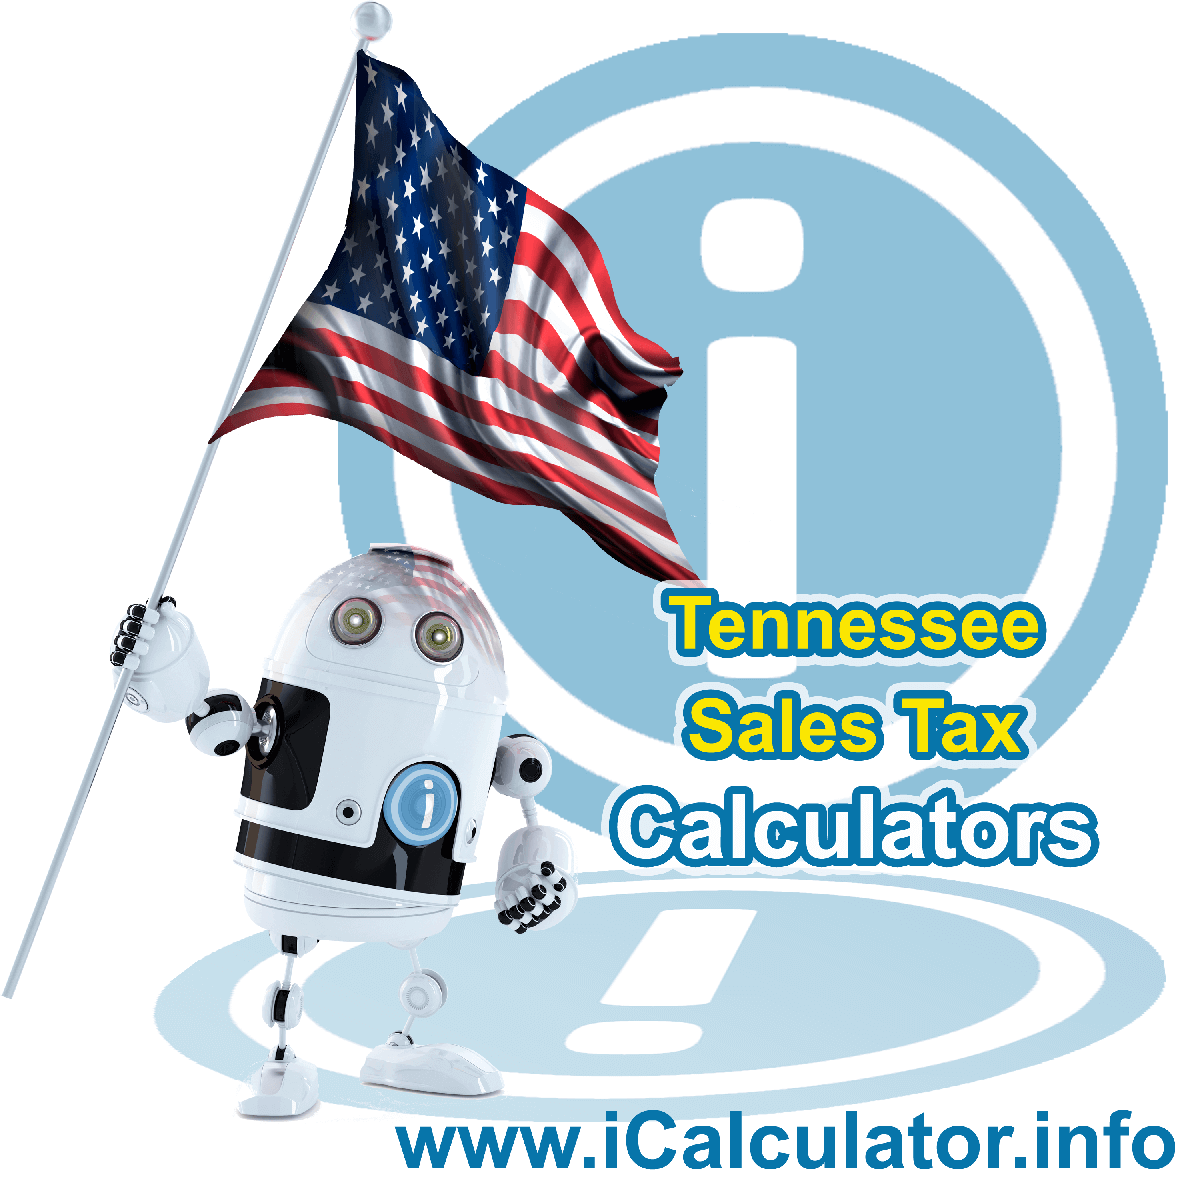 Tennessee Sales Tax Comparison Calculator: This image illustrates a calculator robot comparing sales tax in Tennessee manually using the Tennessee Sales Tax Formula. You can use this information to compare Sales Tax manually or use the Tennessee Sales Tax Comparison Calculator to calculate and compare Tennessee sales tax online.